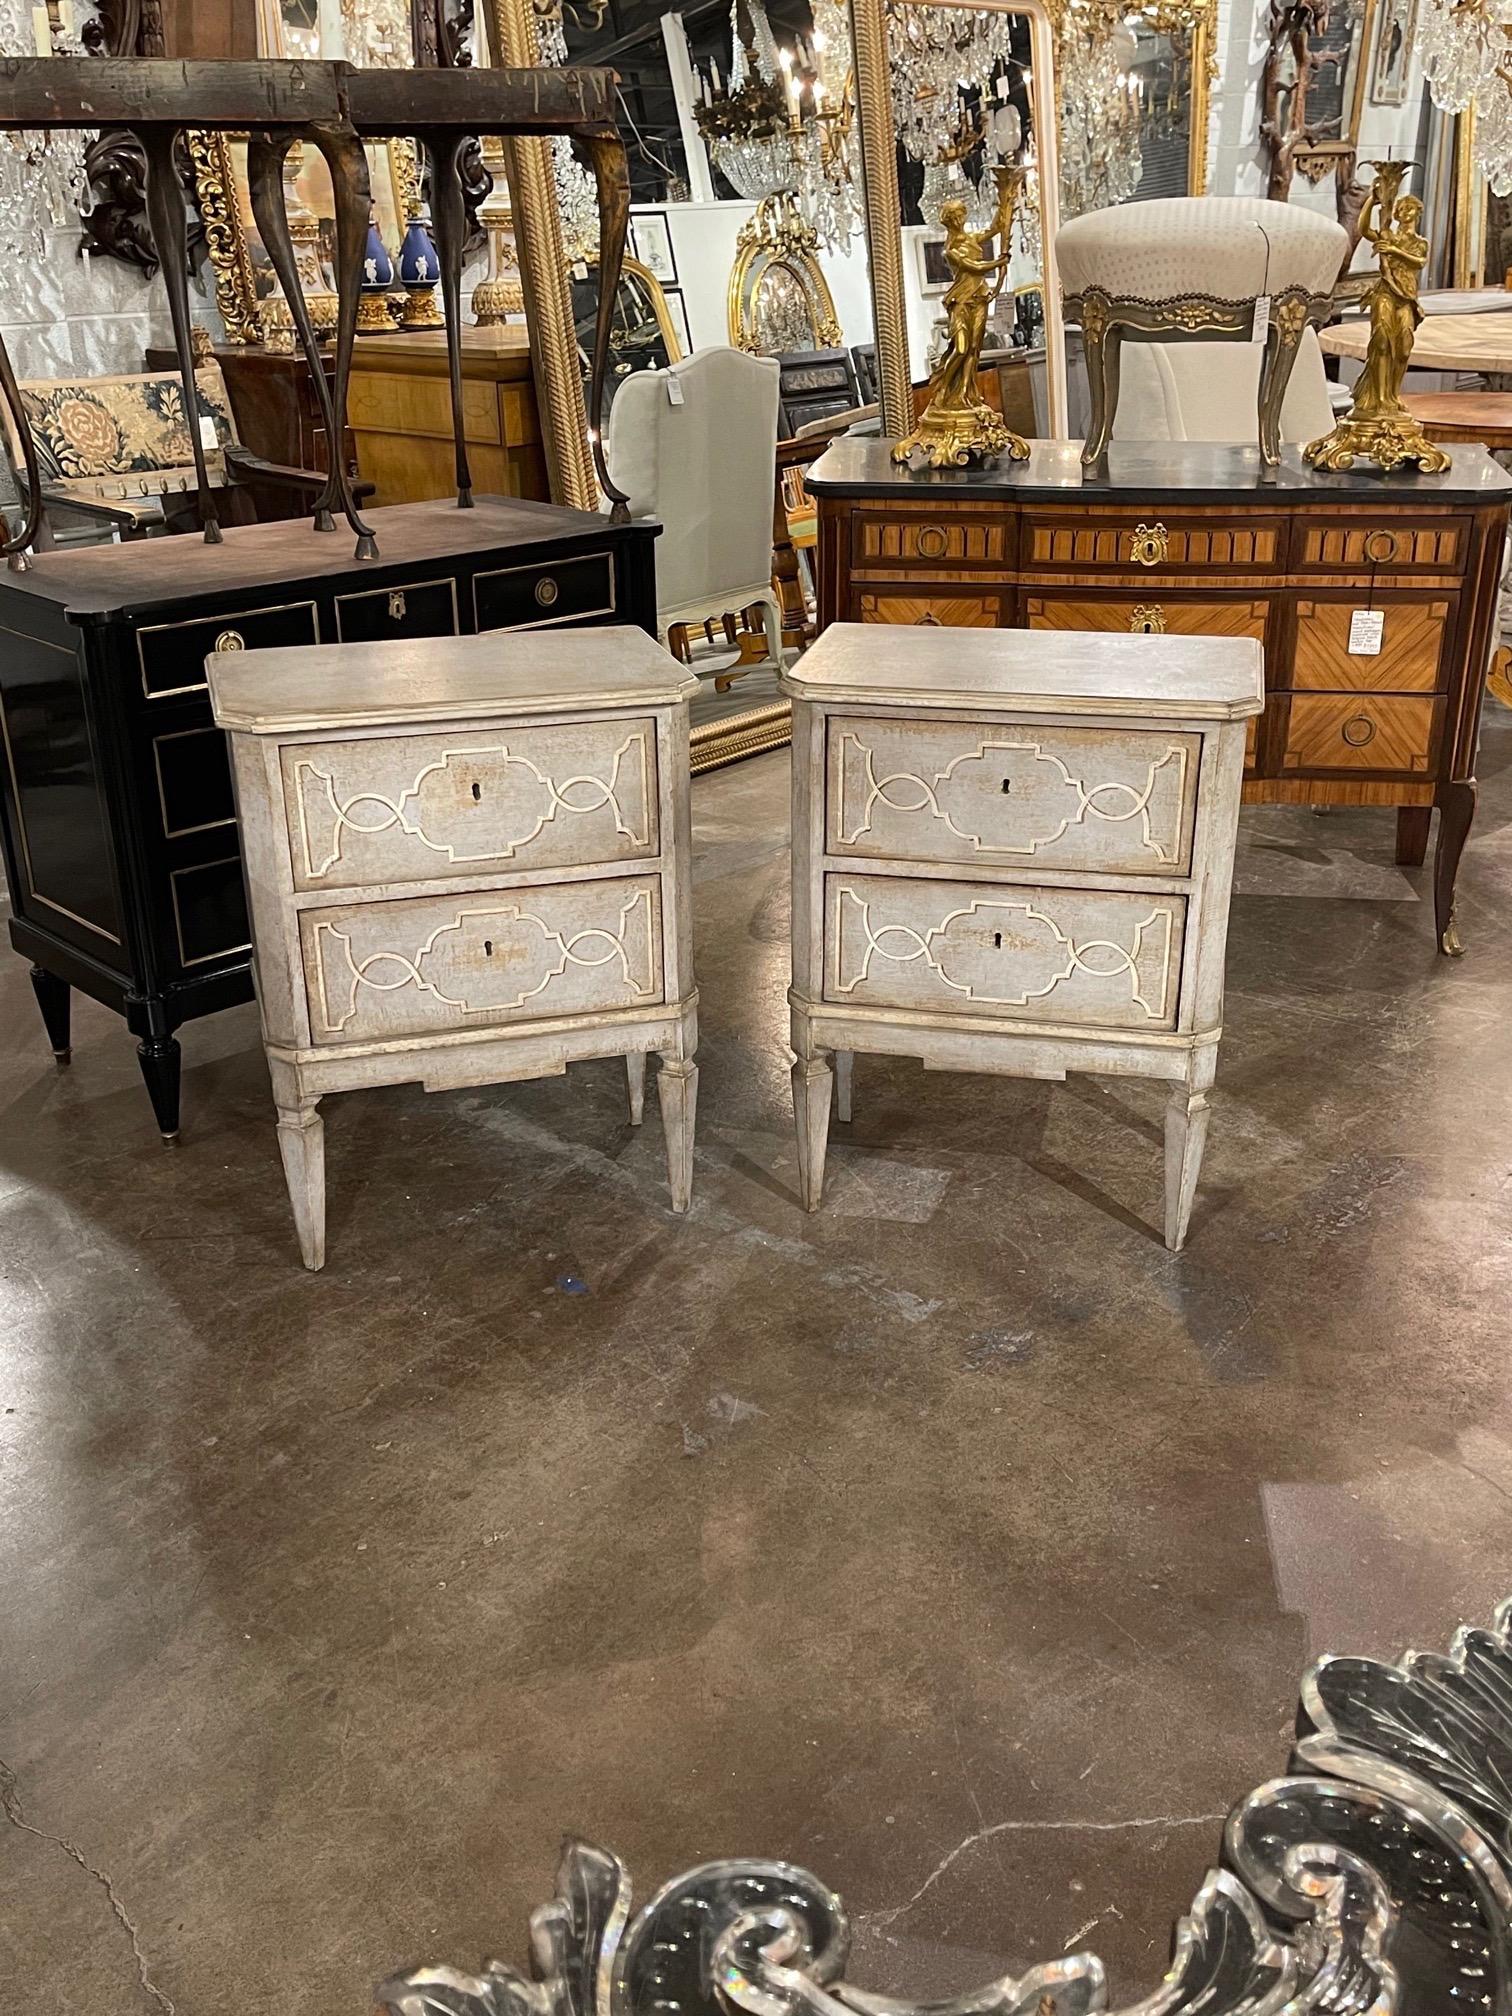 Fabulous pair of Italian neoclassical style hand painted bed side tables. Beautiful bluish patina and pretty painted pattern. Mixes well with a variety of decors!